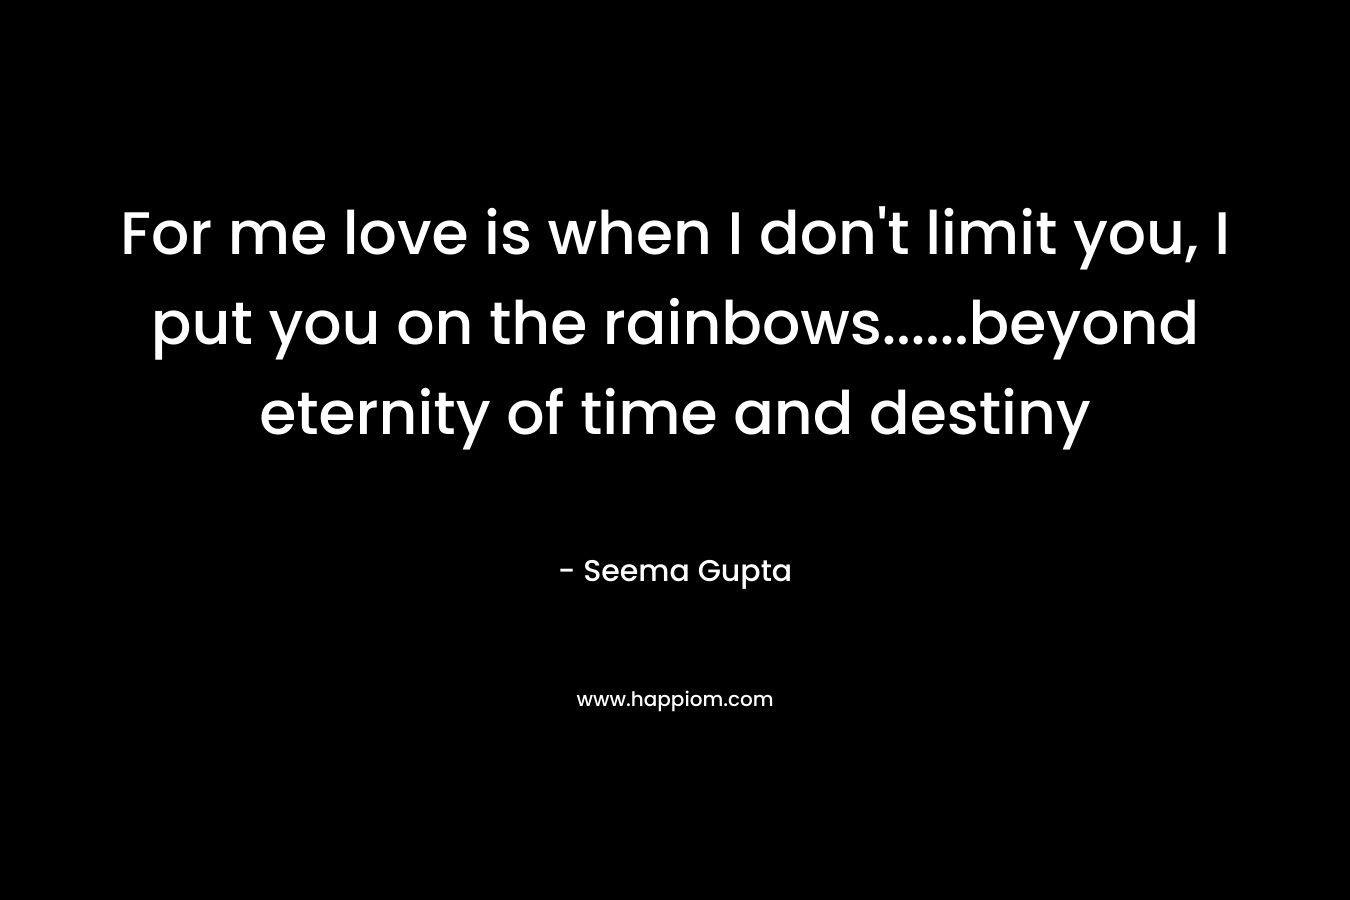 For me love is when I don’t limit you, I put you on the rainbows……beyond eternity of time and destiny  – Seema Gupta